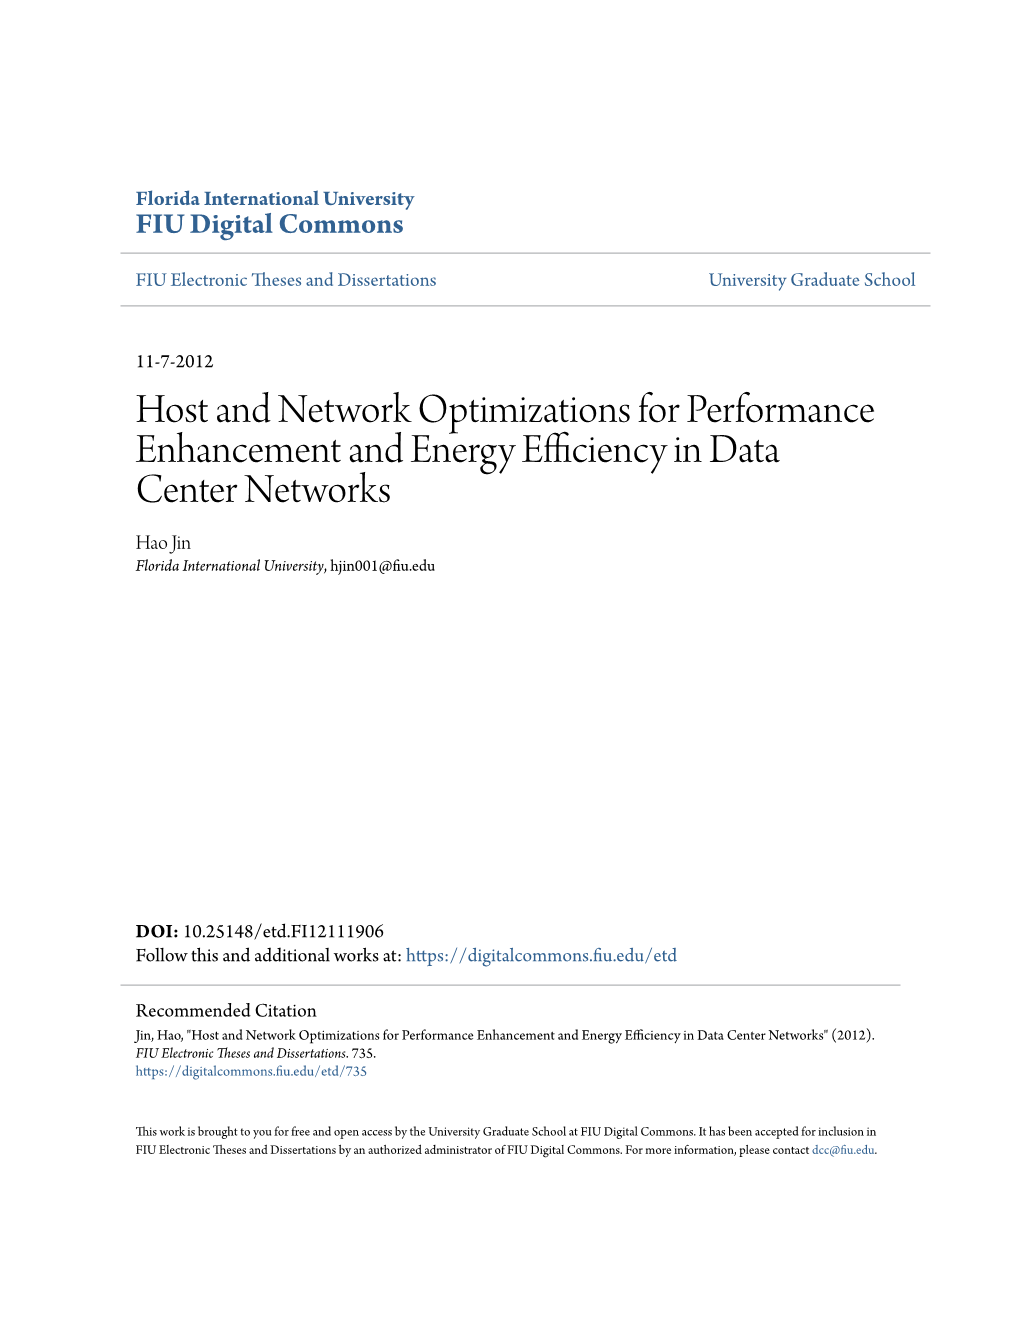 Host and Network Optimizations for Performance Enhancement and Energy Efficiency in Data Center Networks Hao Jin Florida International University, Hjin001@Fiu.Edu